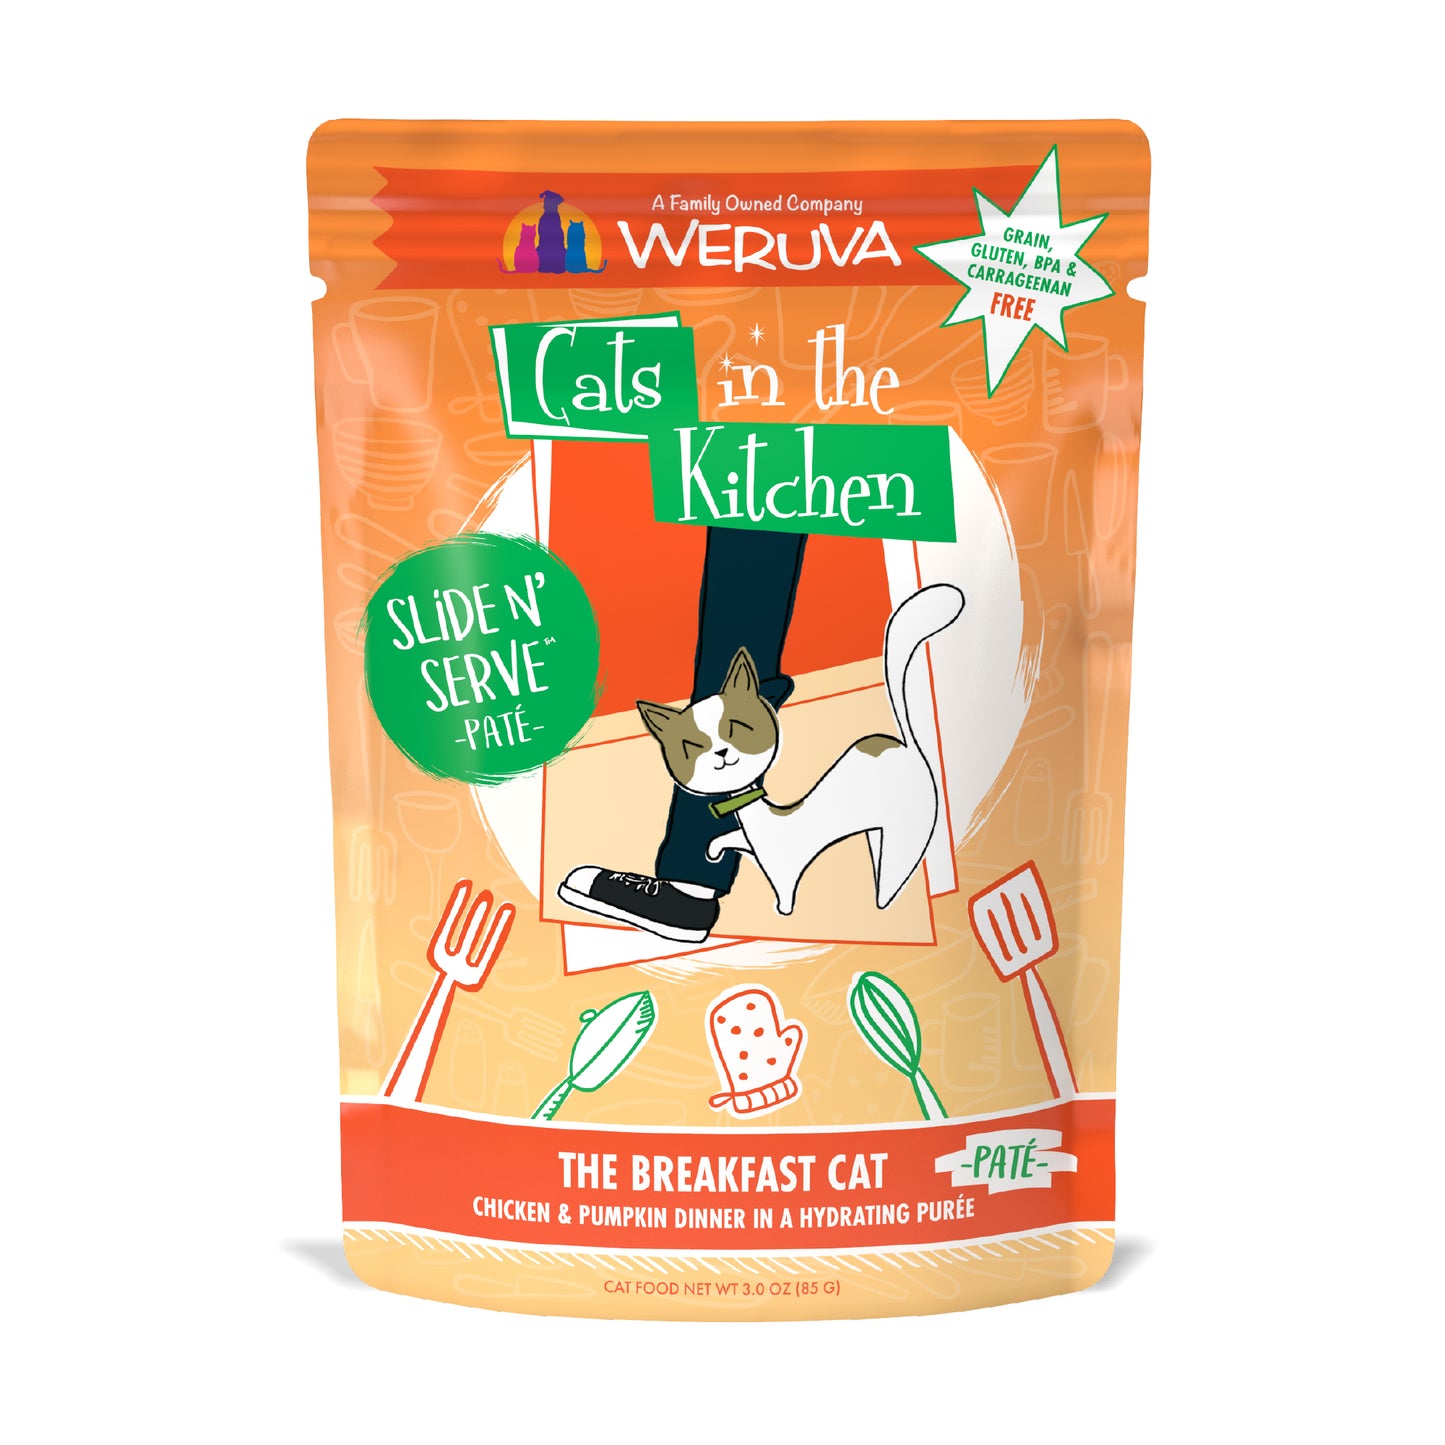 Weruva Cats in the Kitchen Slide N Serve Pouch Pate Cat food 3oz the Breakfast Cat